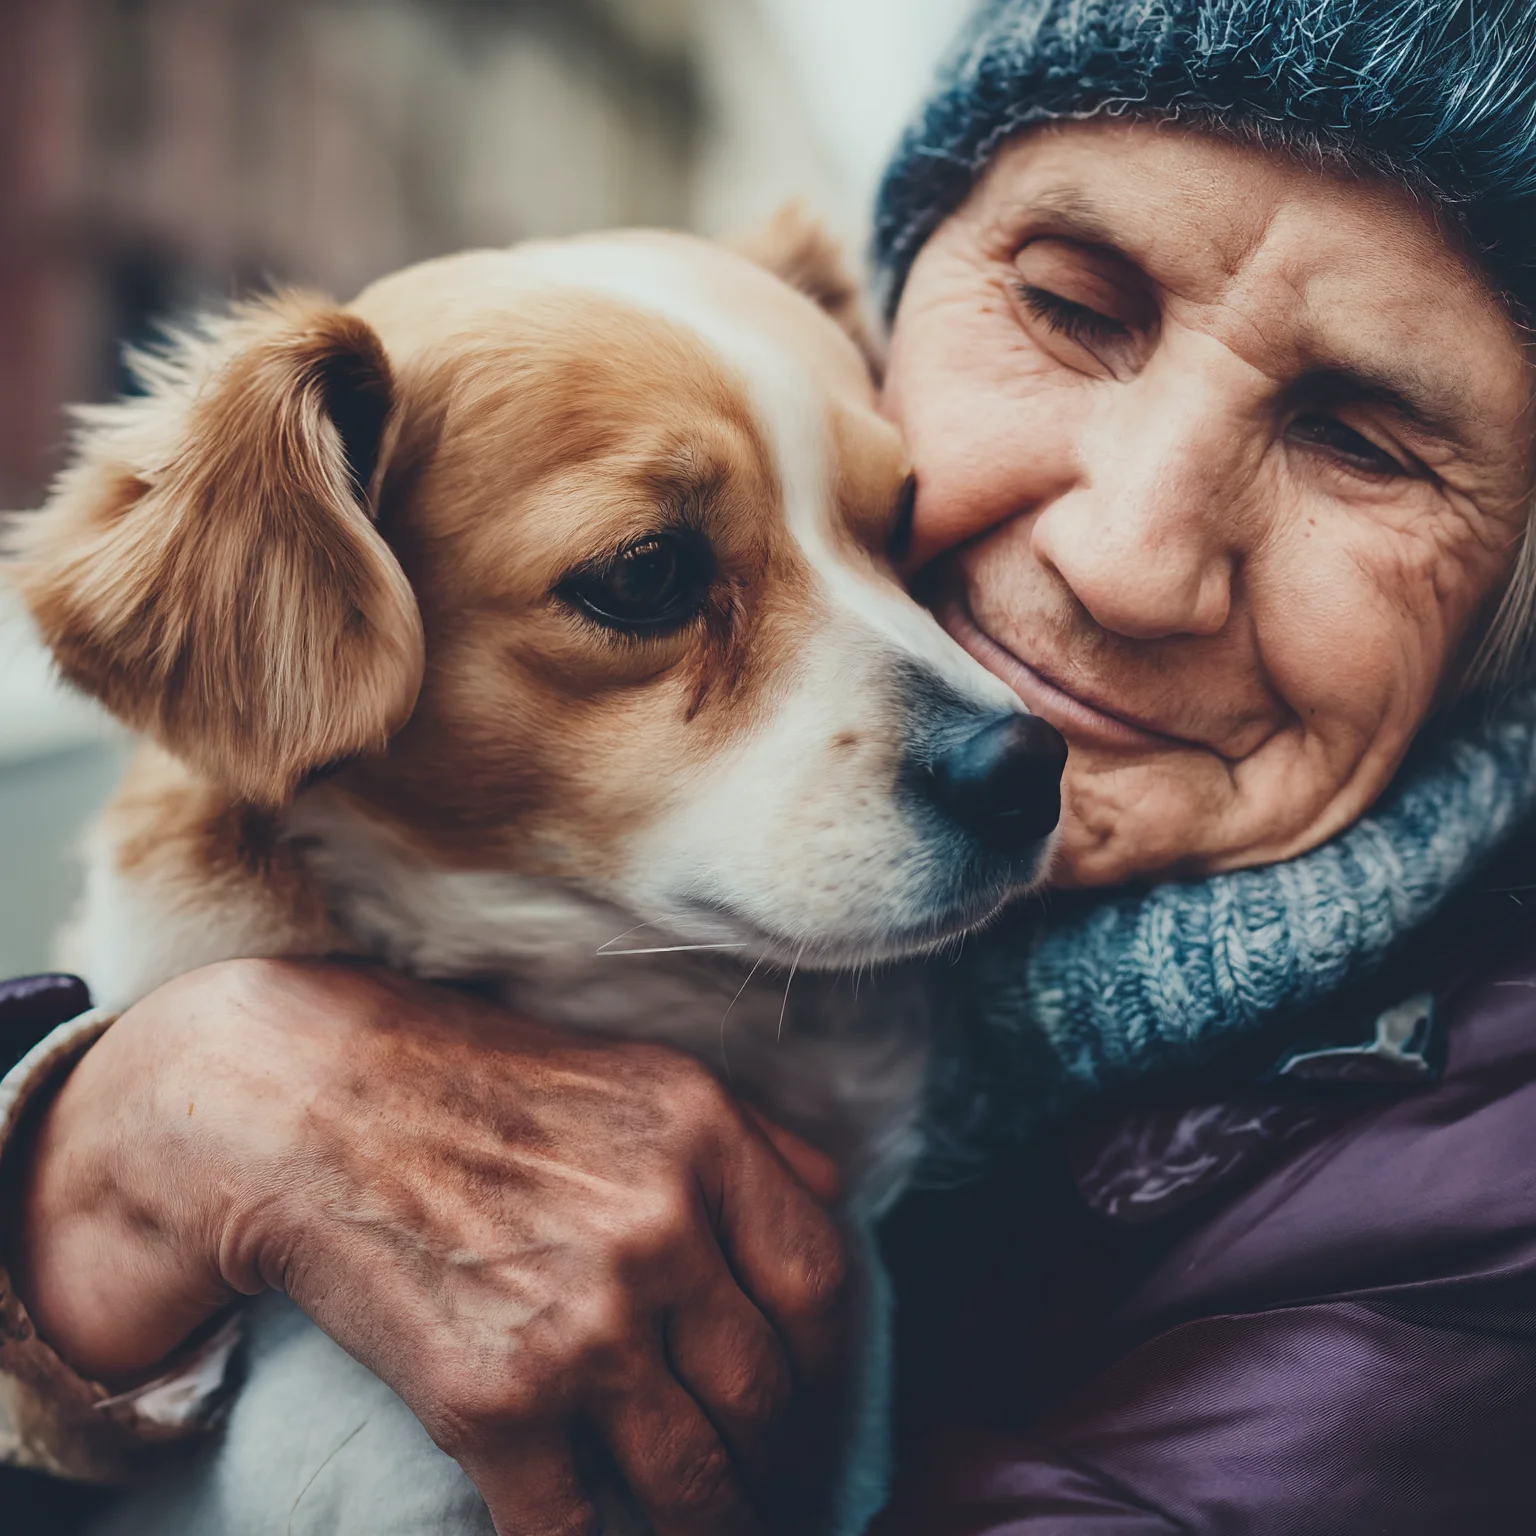 A close-up image of an elderly woman wearing a beanie and scarf holding a brown and white dog.